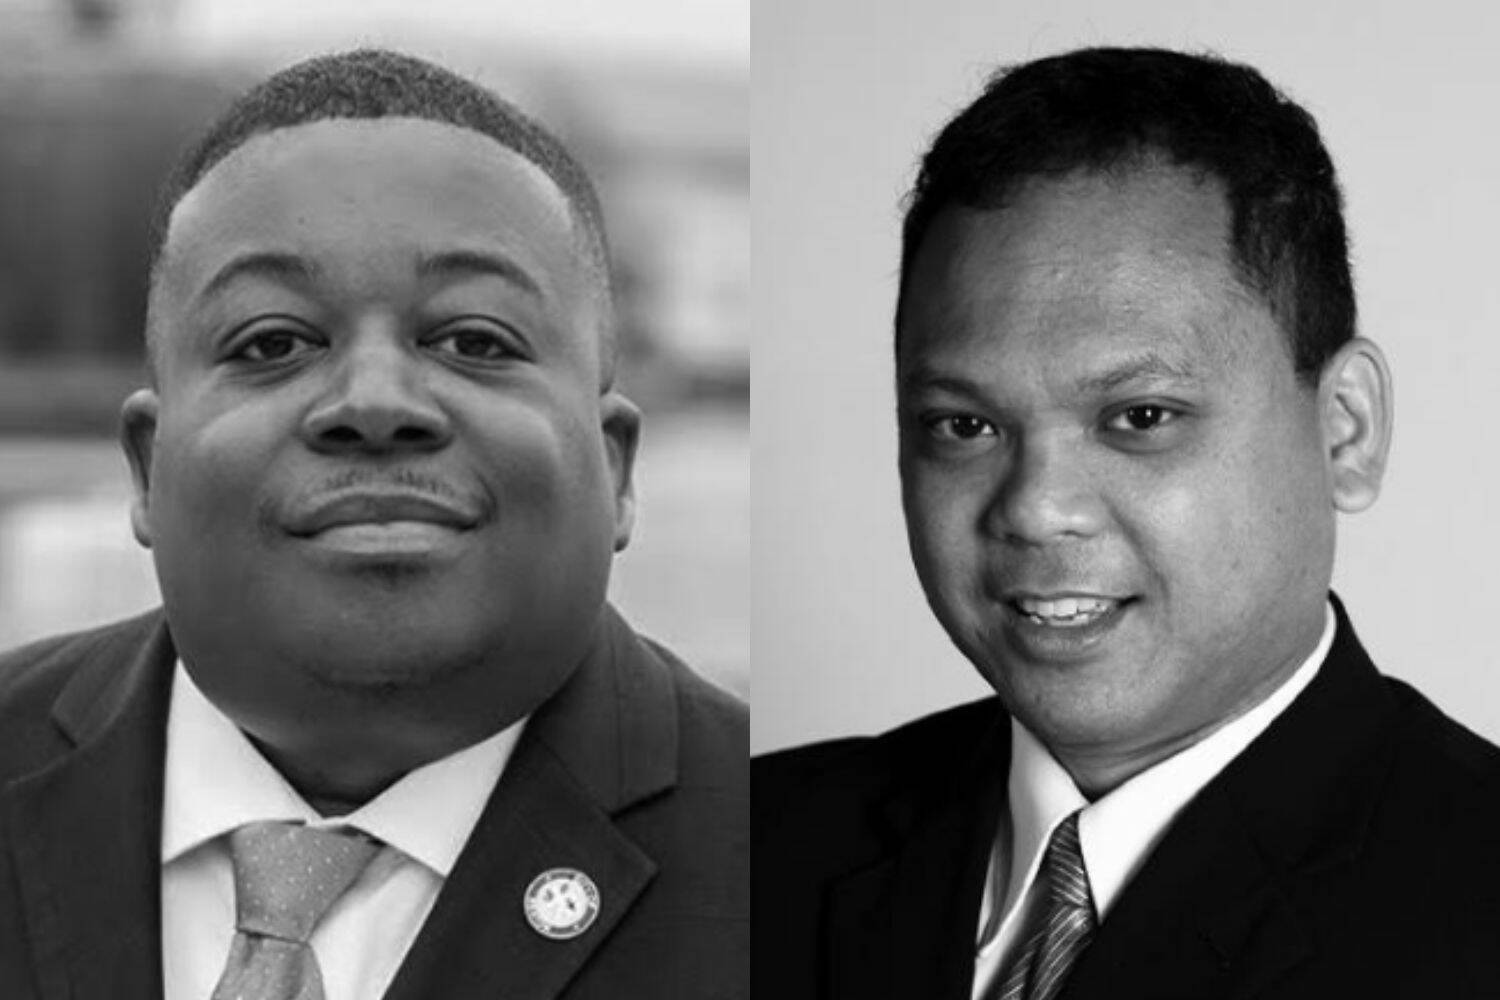 Ed Prince (left) and Marvin Rosete (right). (Screenshot from King County Elections website)